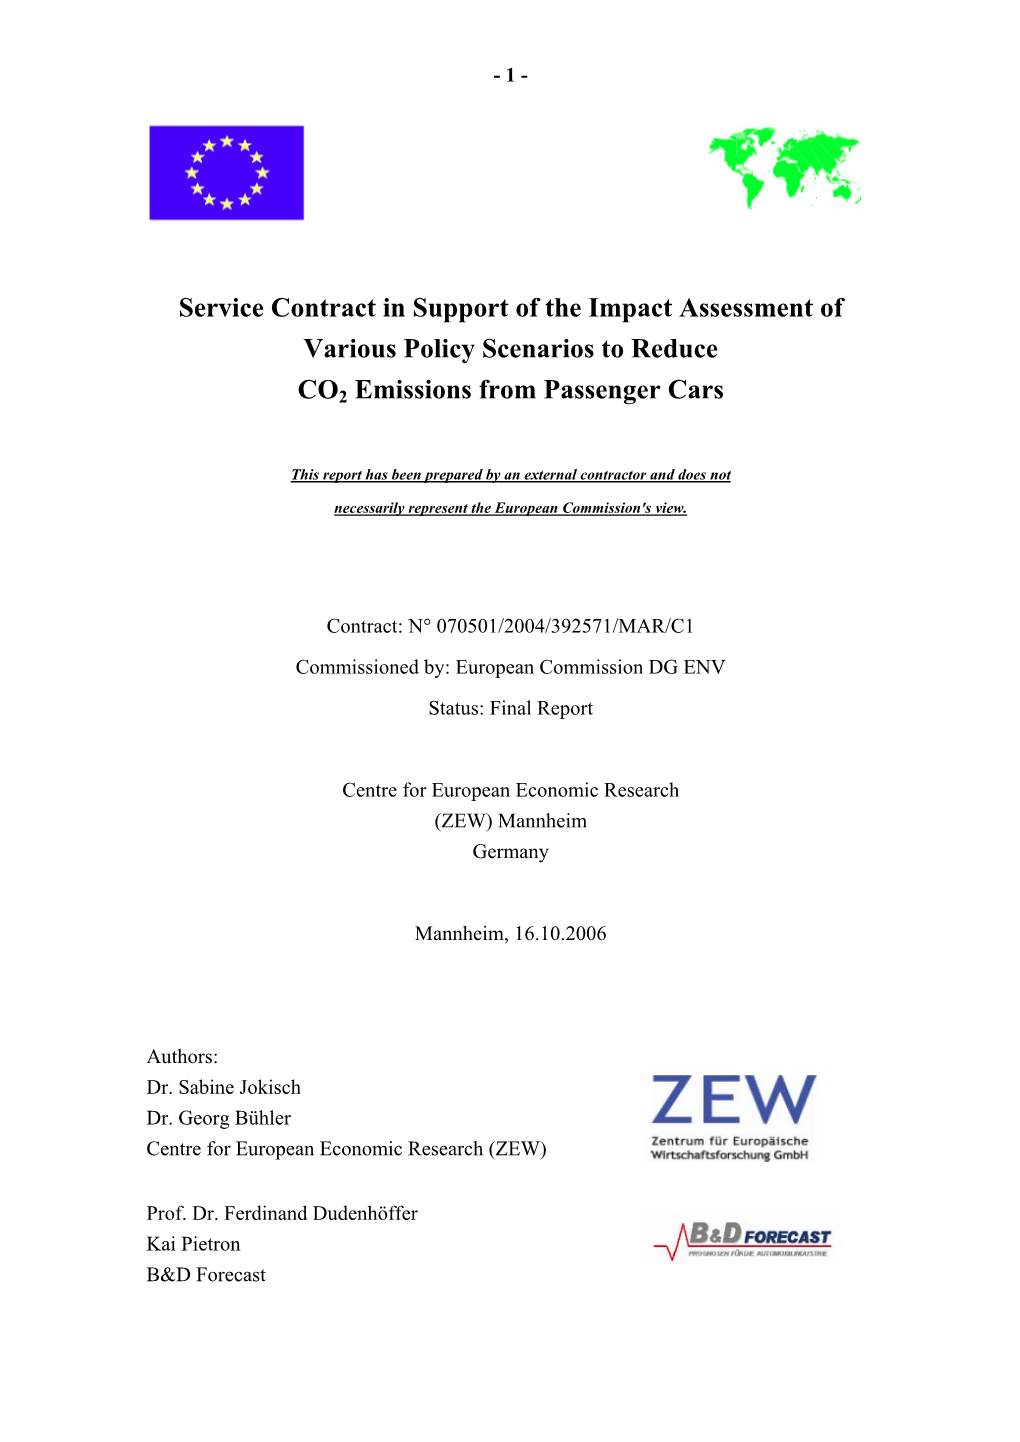 Service Contract in Support of the Impact Assessment of Various Policy Scenarios to Reduce